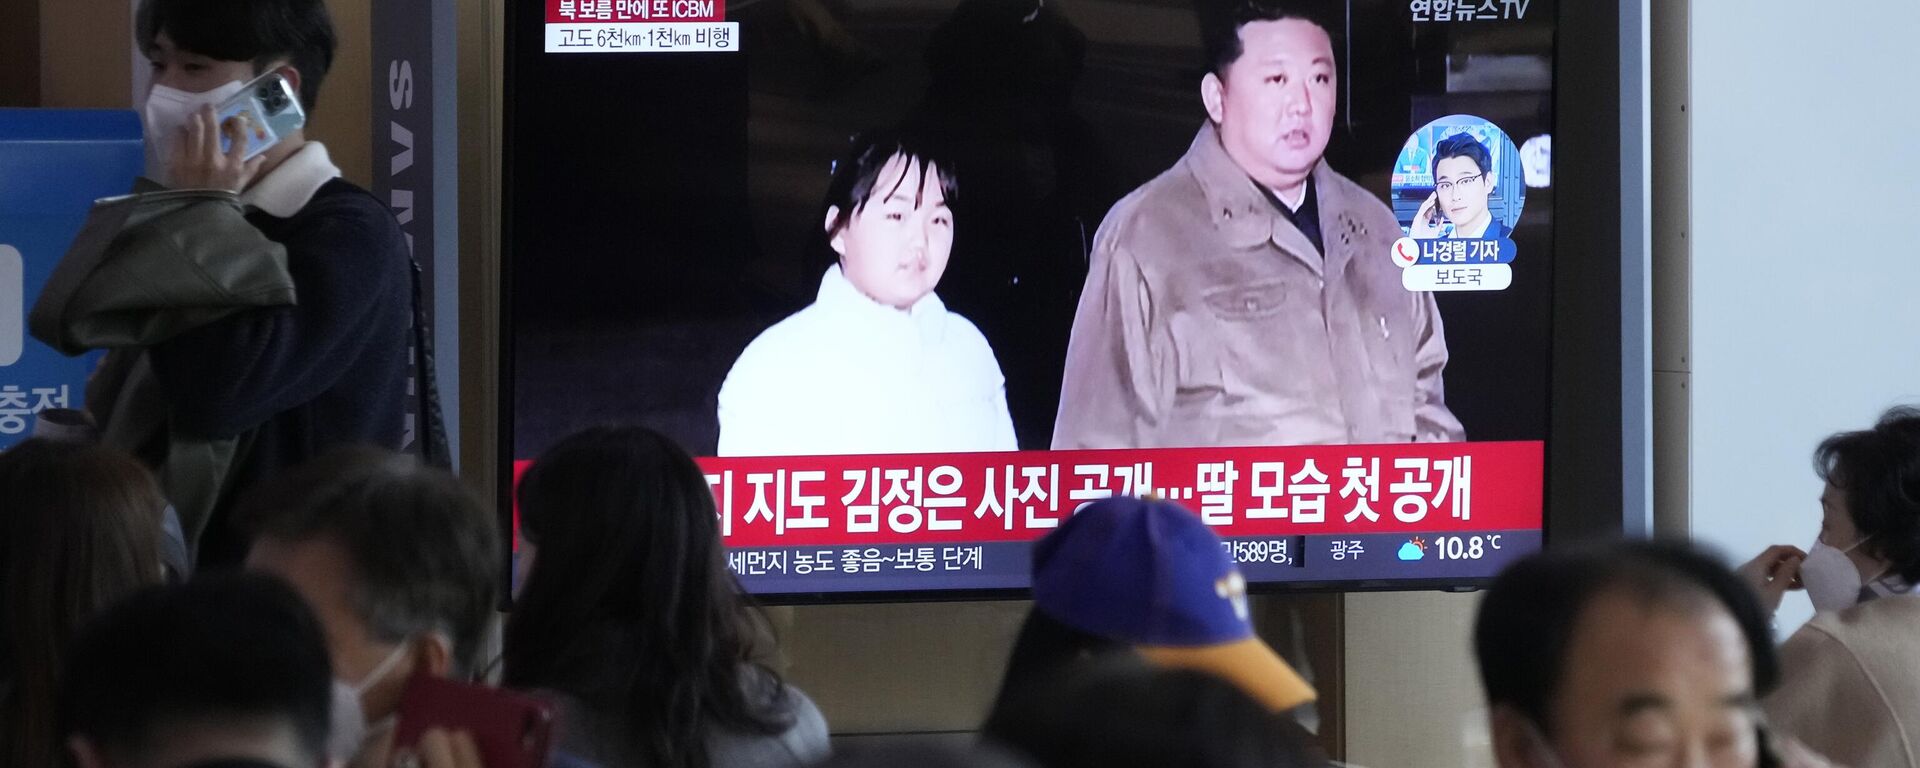 A TV screen shows an image of North Korean leader Kim Jong Un and his daughter during a news program at the Seoul Railway Station in Seoul, South Korea, - Sputnik International, 1920, 18.12.2022